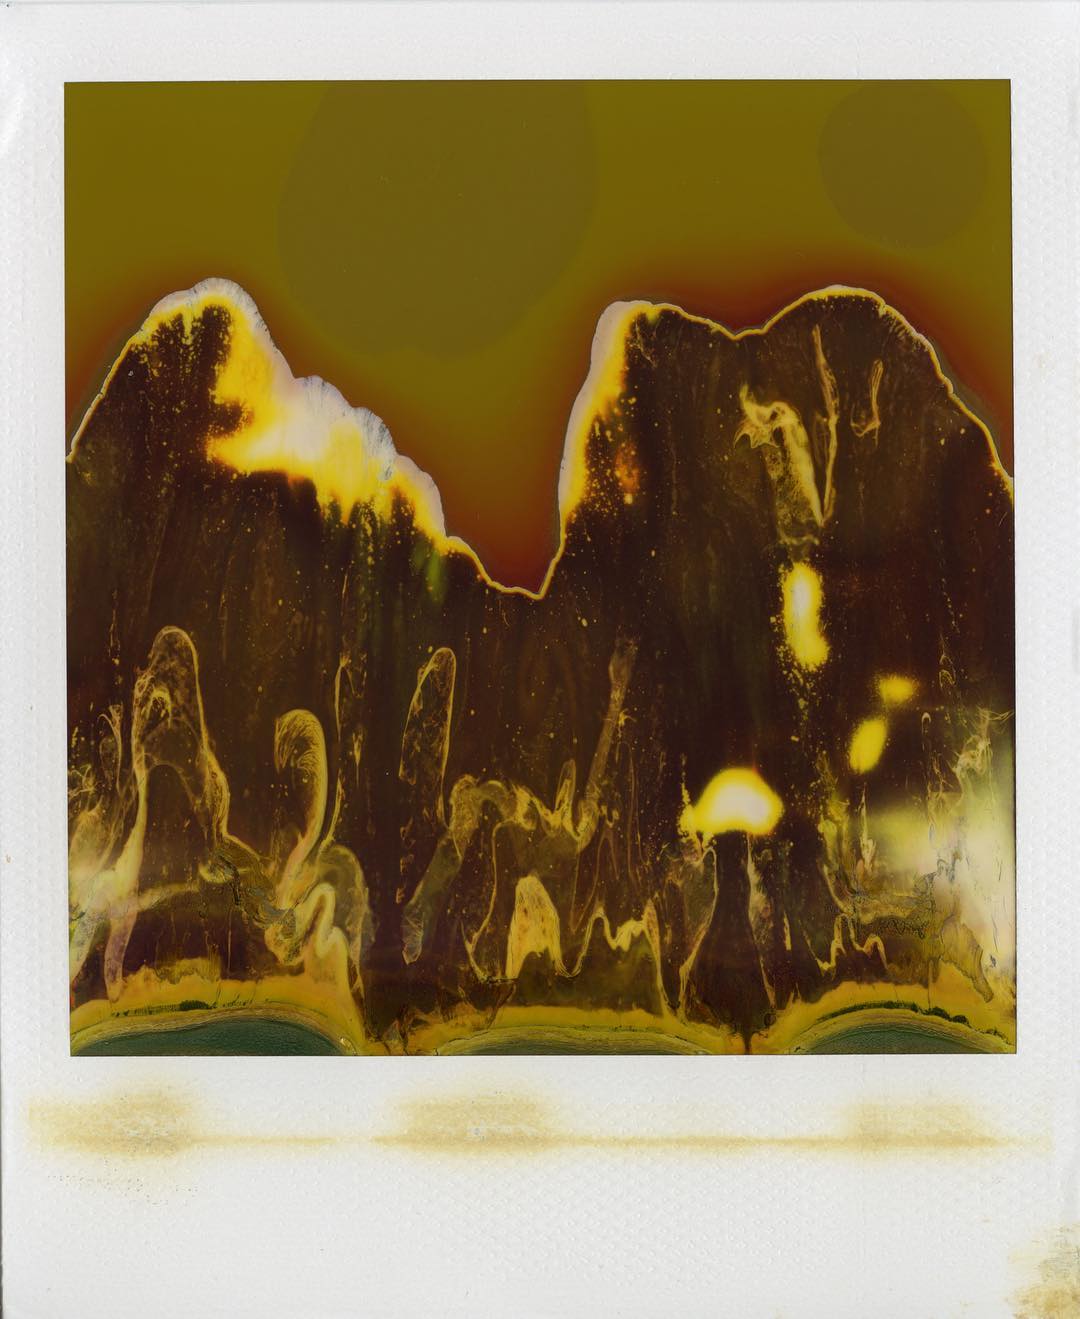 Bermuda One #aprilfailsday For a time, Impossible Project occasionally produced a pack that would eject multiple sheets at a time. I brought one of those packs (unintentionally) on a vacation to Bermuda a few years ago. #film #filmphotography #polaroid #sx70